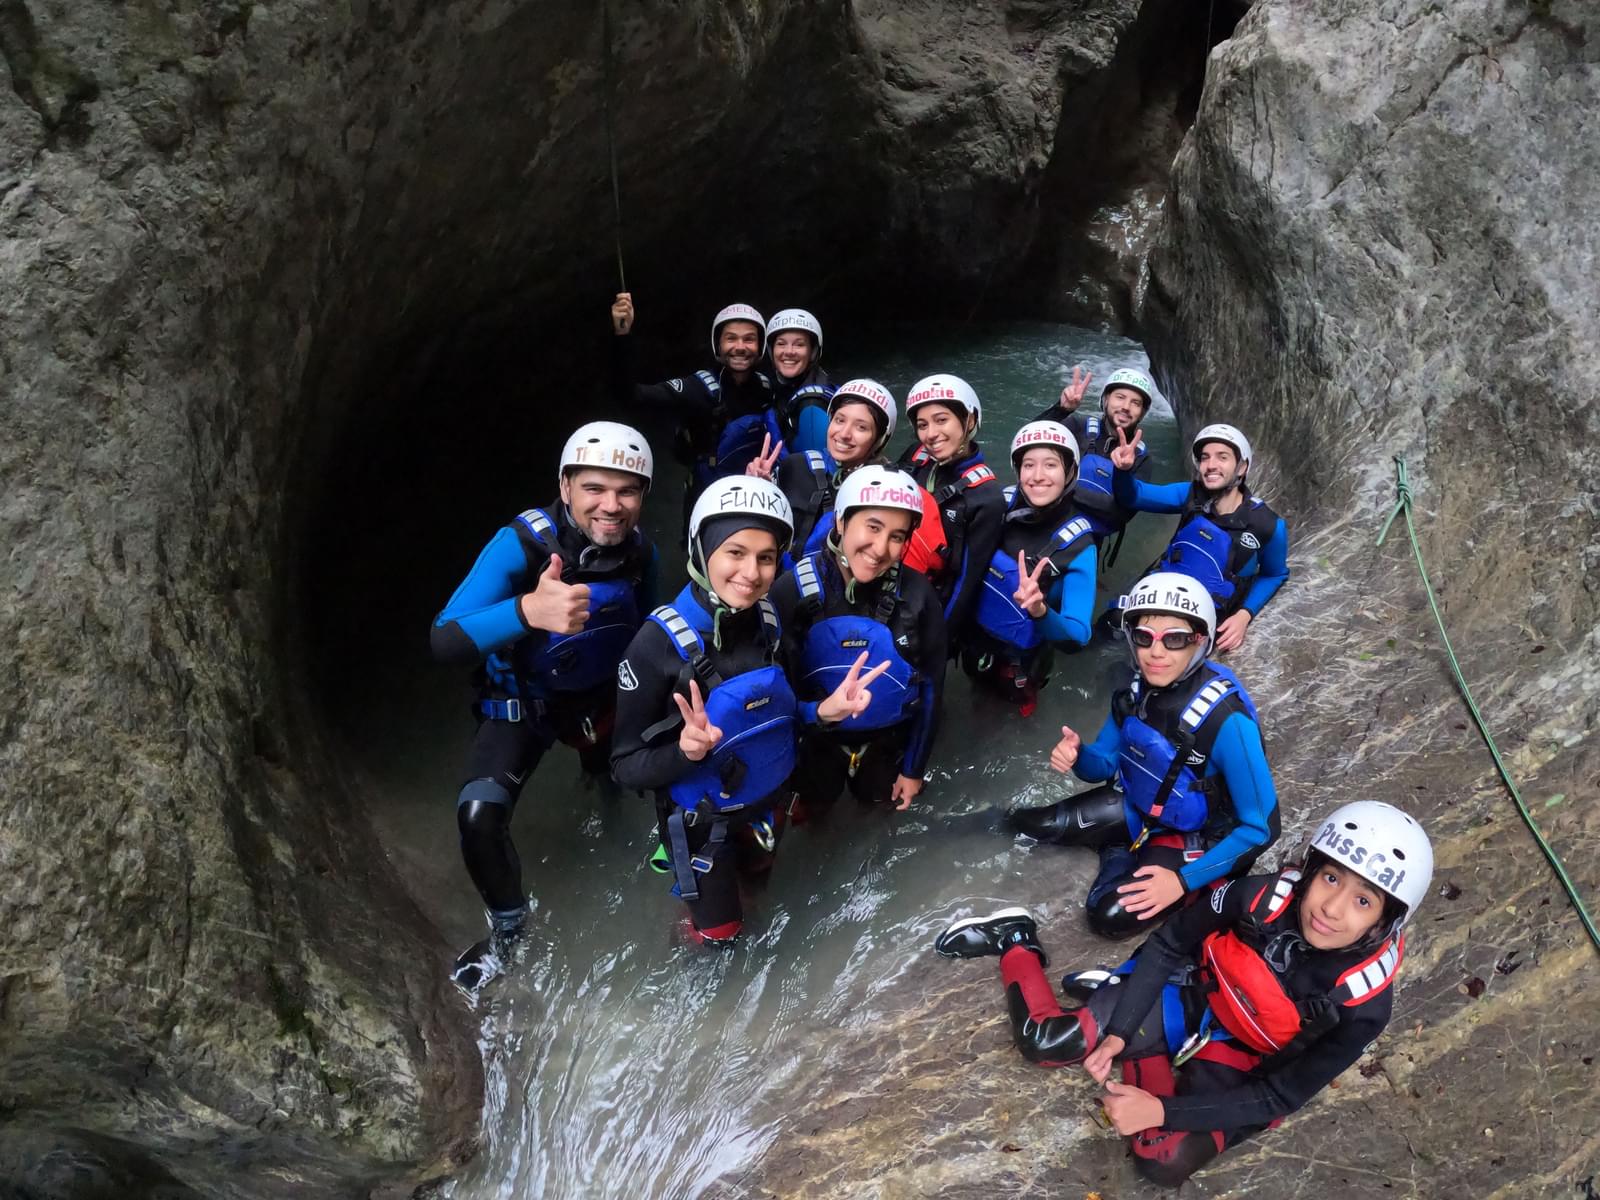 Canyoning in the Saxeten Gorge in Interlaken